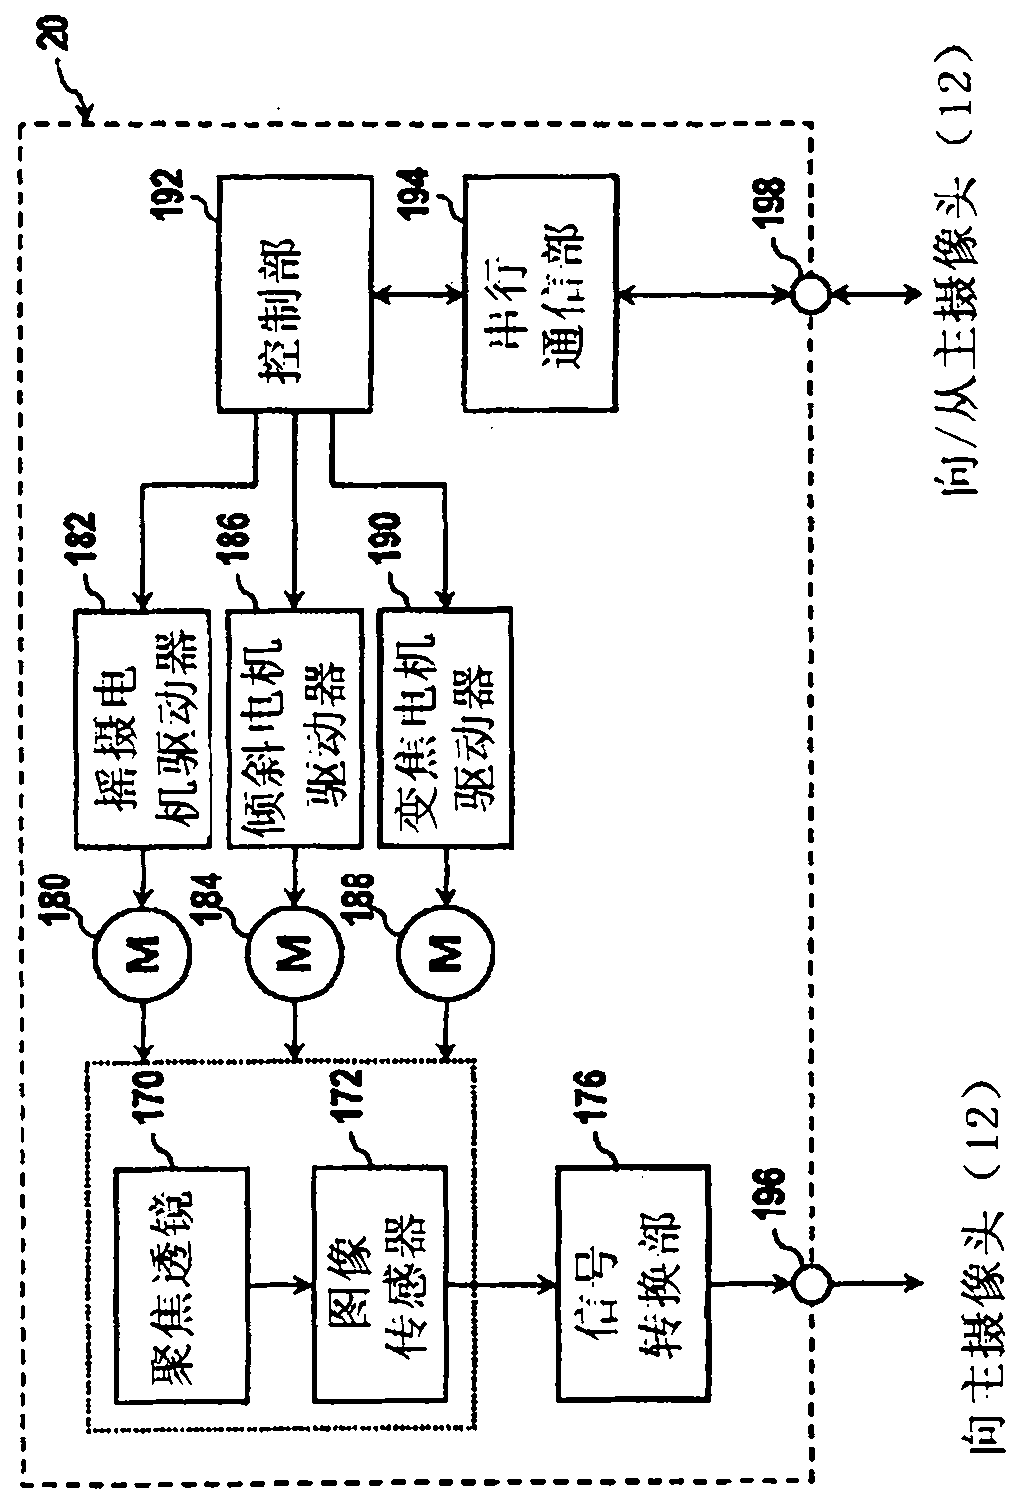 Intelligent monitoring camera apparatus and image monitoring system implementing same